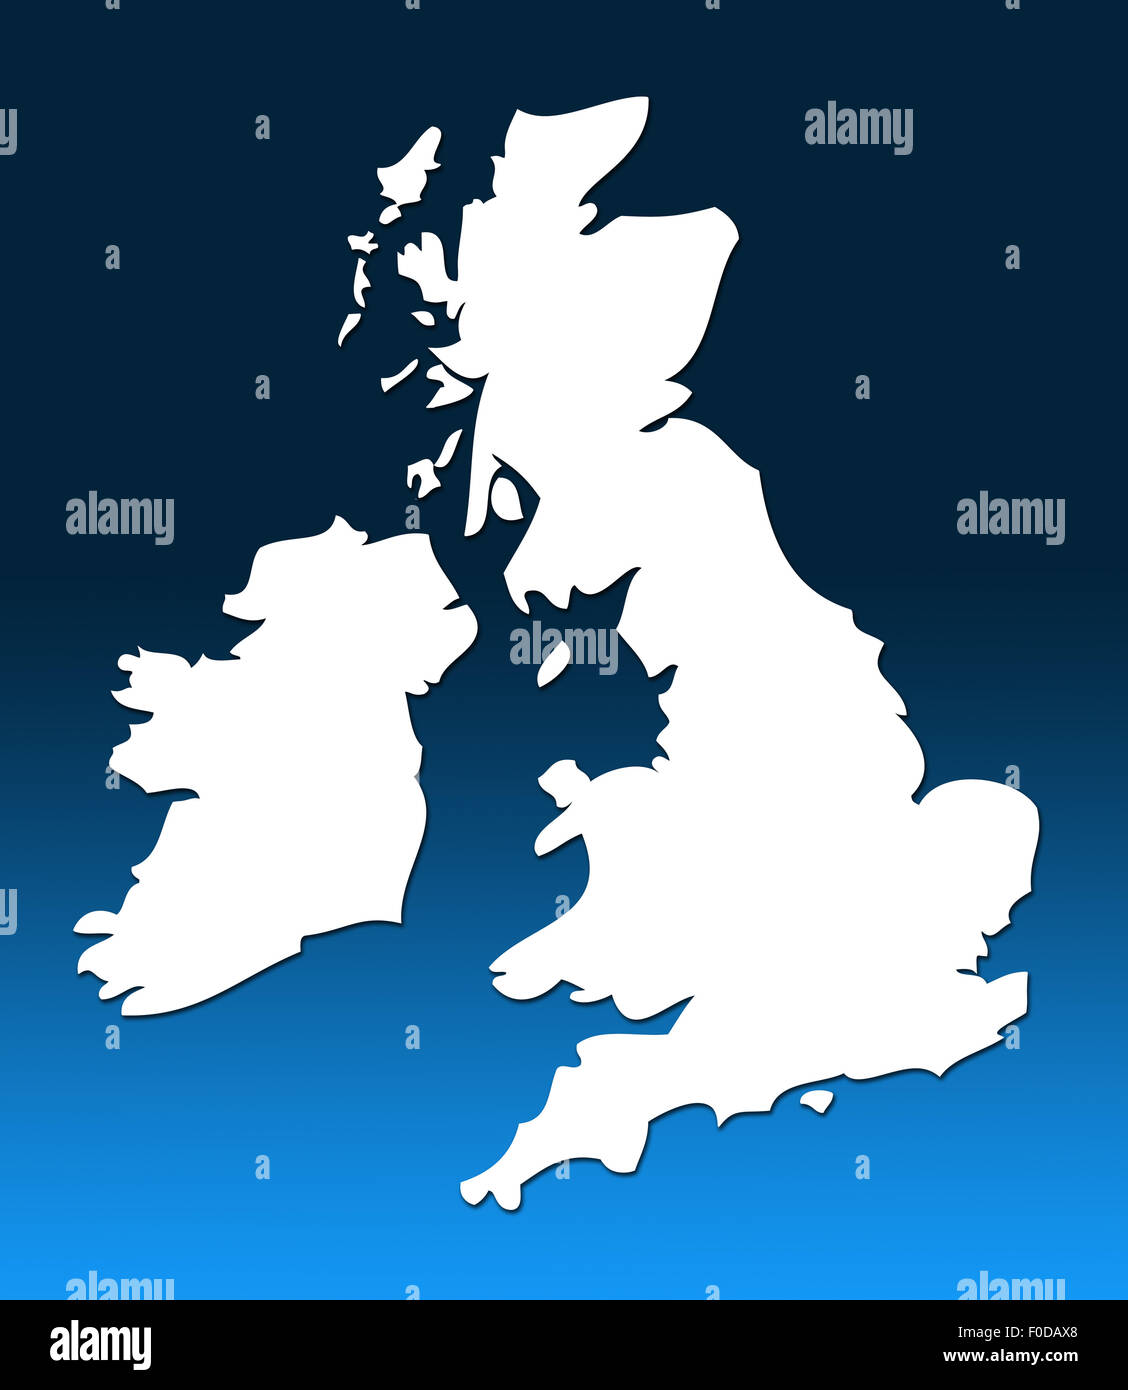 White outline map of UK over blue graduated background Stock Photo